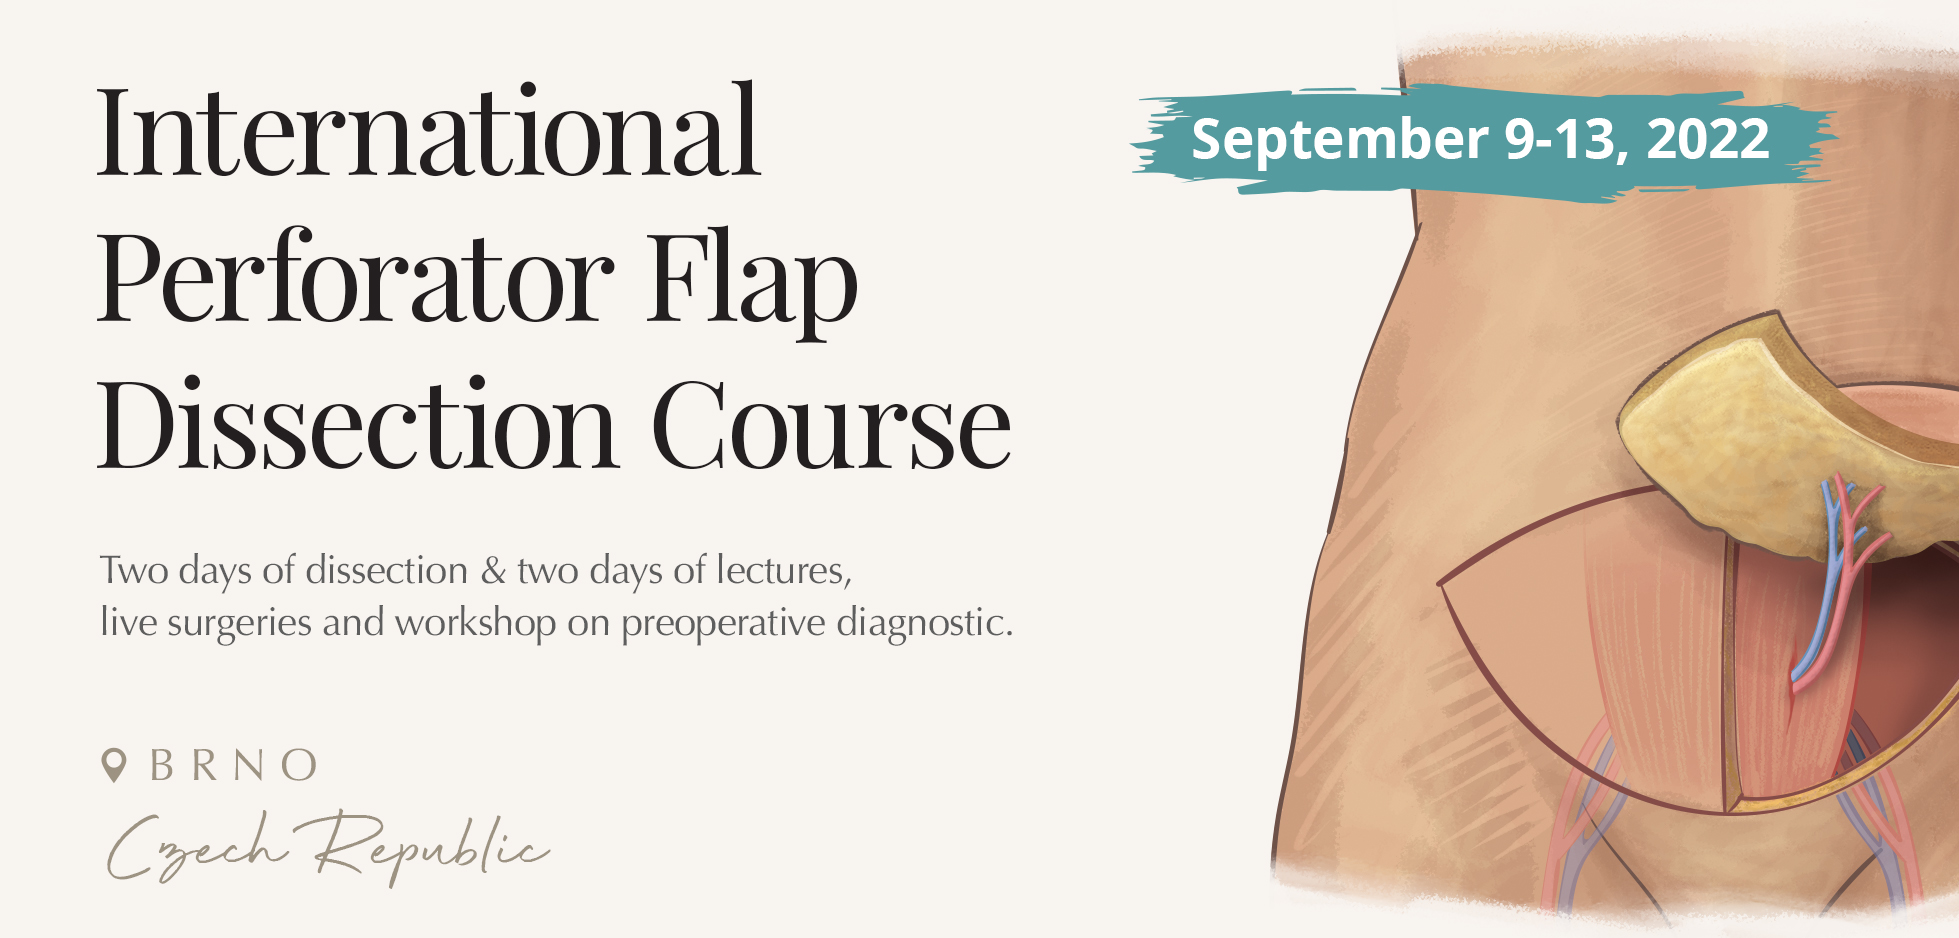 Dissection Course — International Perforator Flap Dissection Course